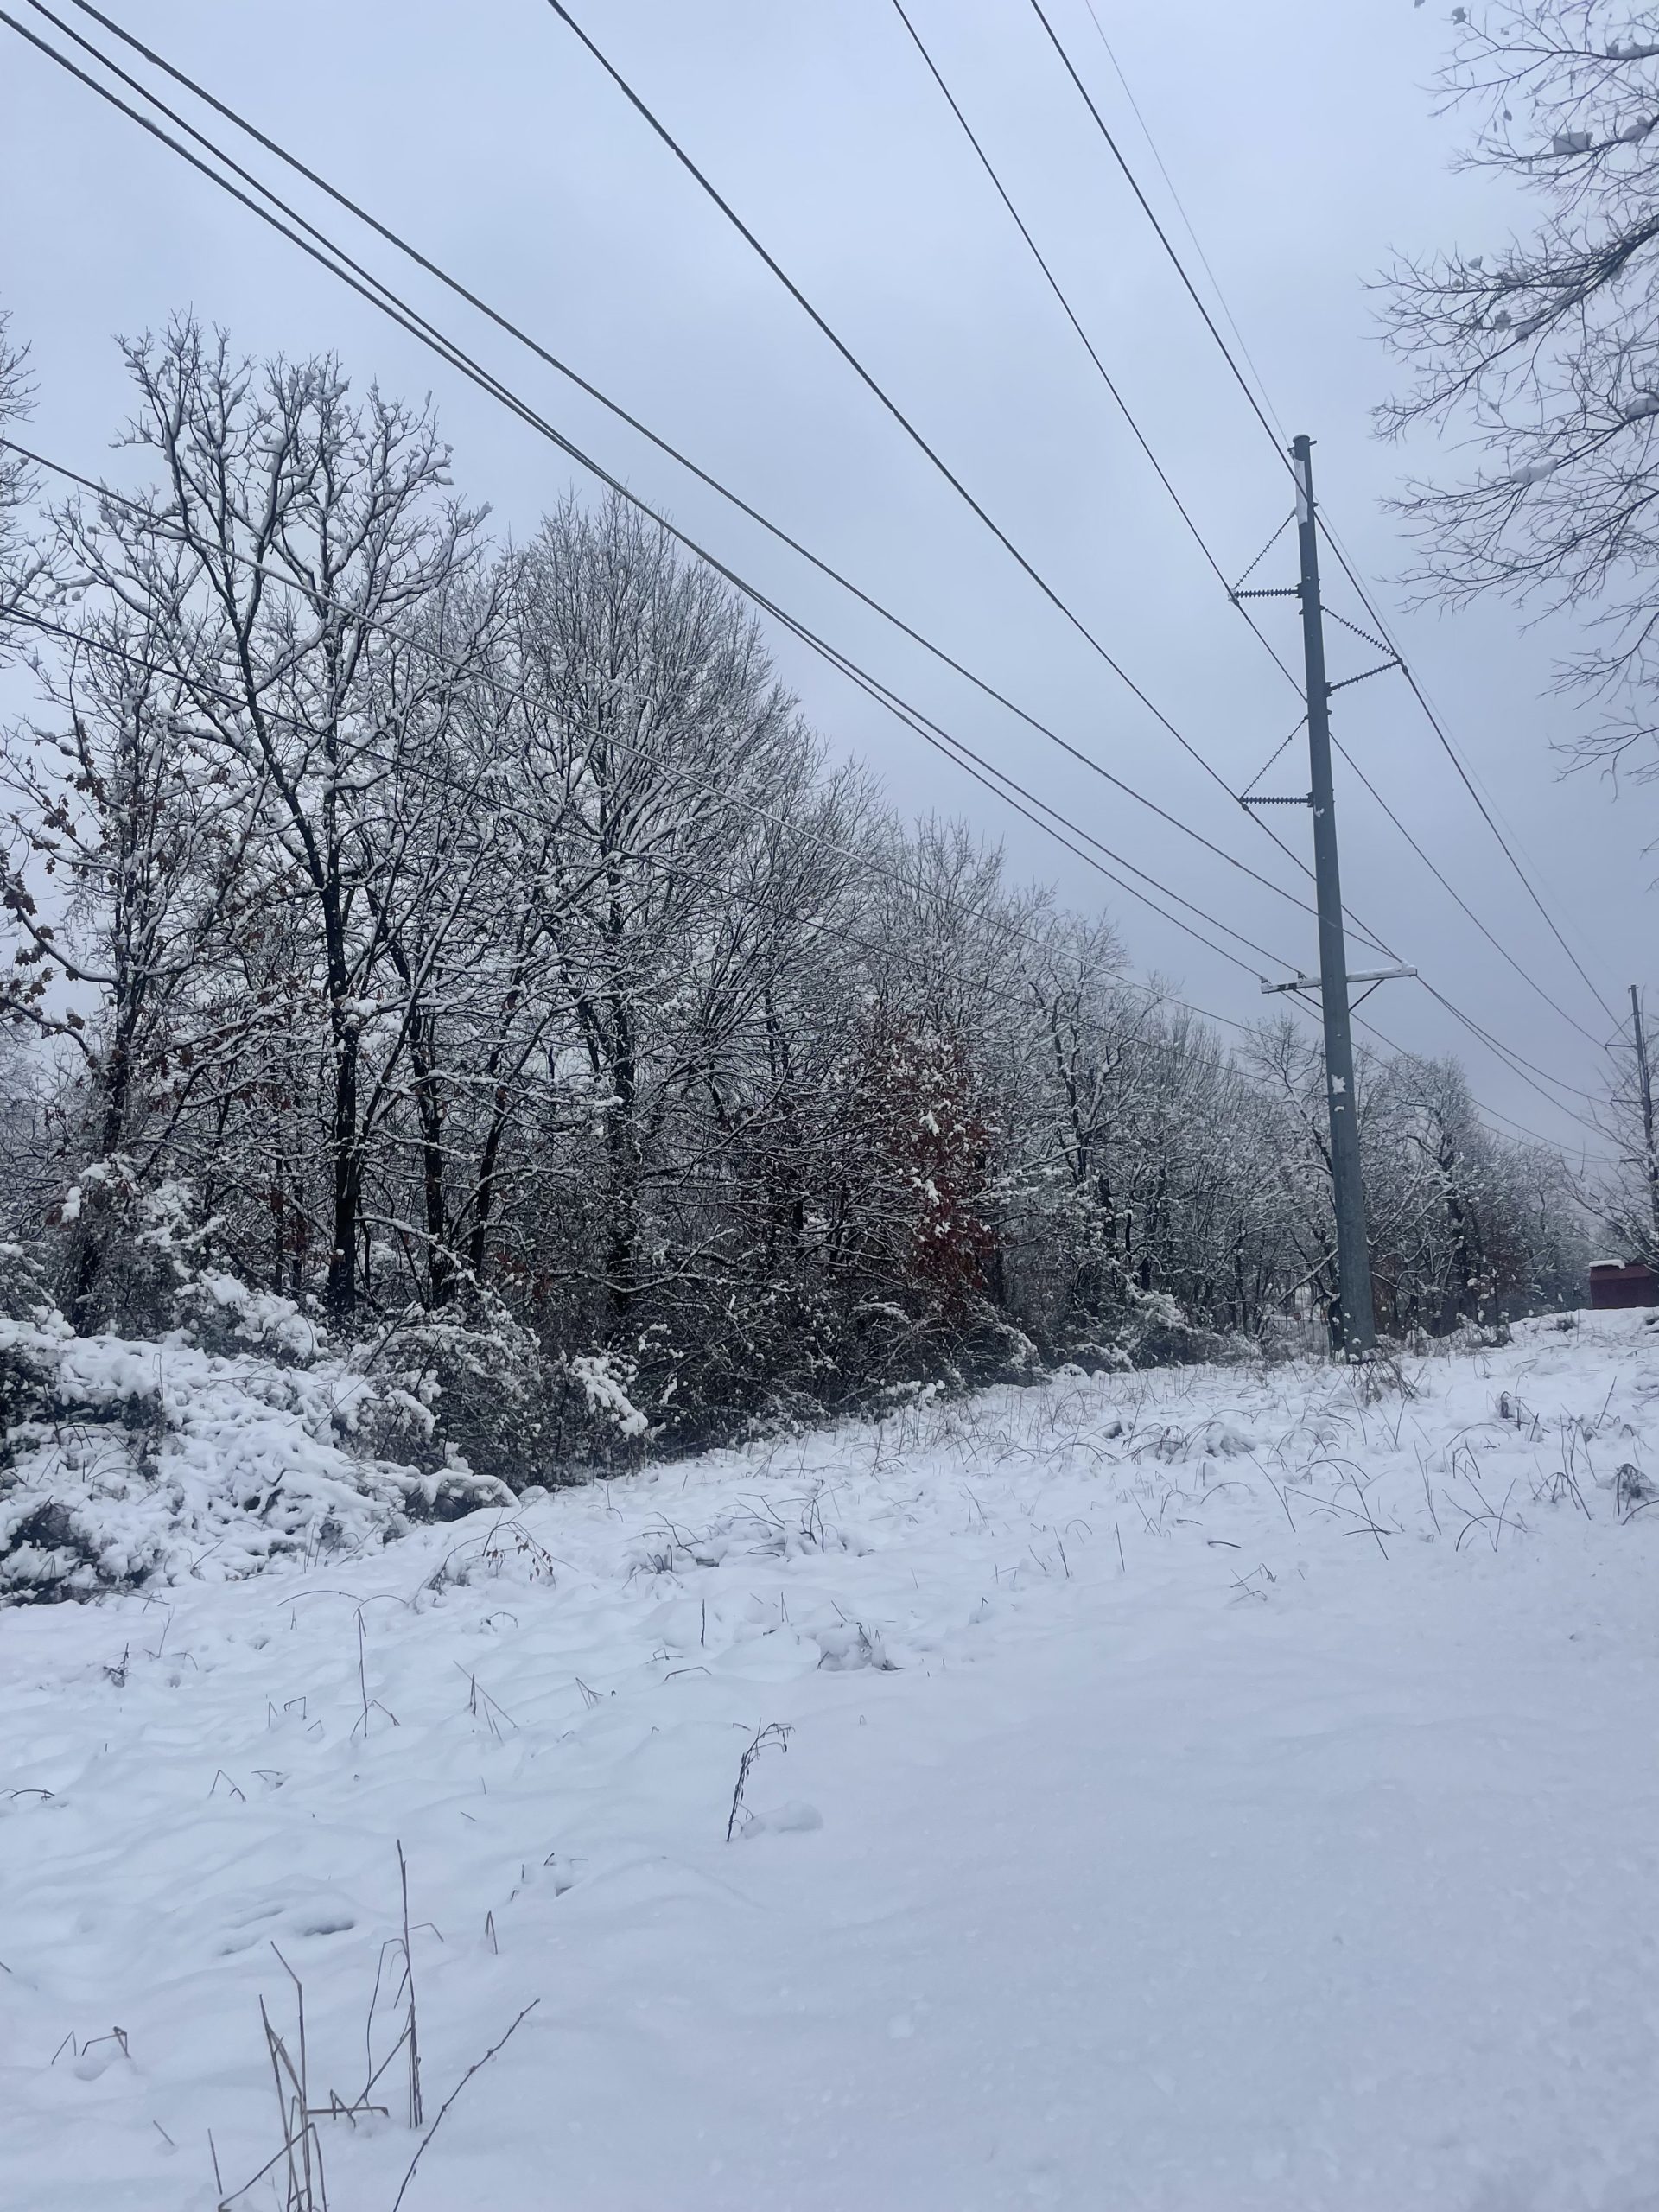 Winter Weather caused Power Outages in Northwest Arkansas Region